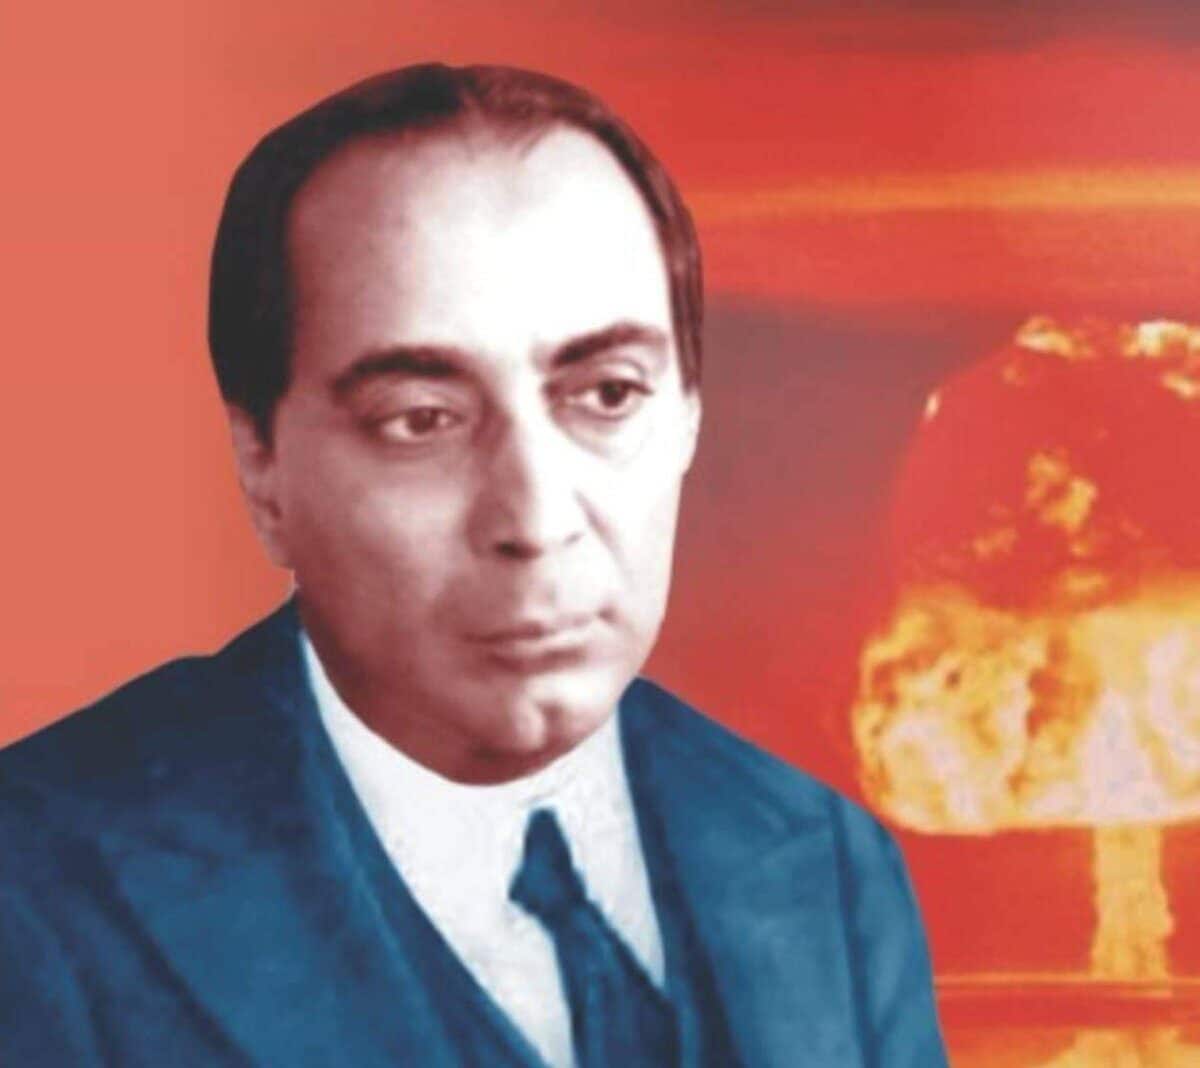 Loco on Twitter: "Homi Jehangir Bhabha is known as the father of India's Nuclear Program. #InGameLocoLaddoo… "